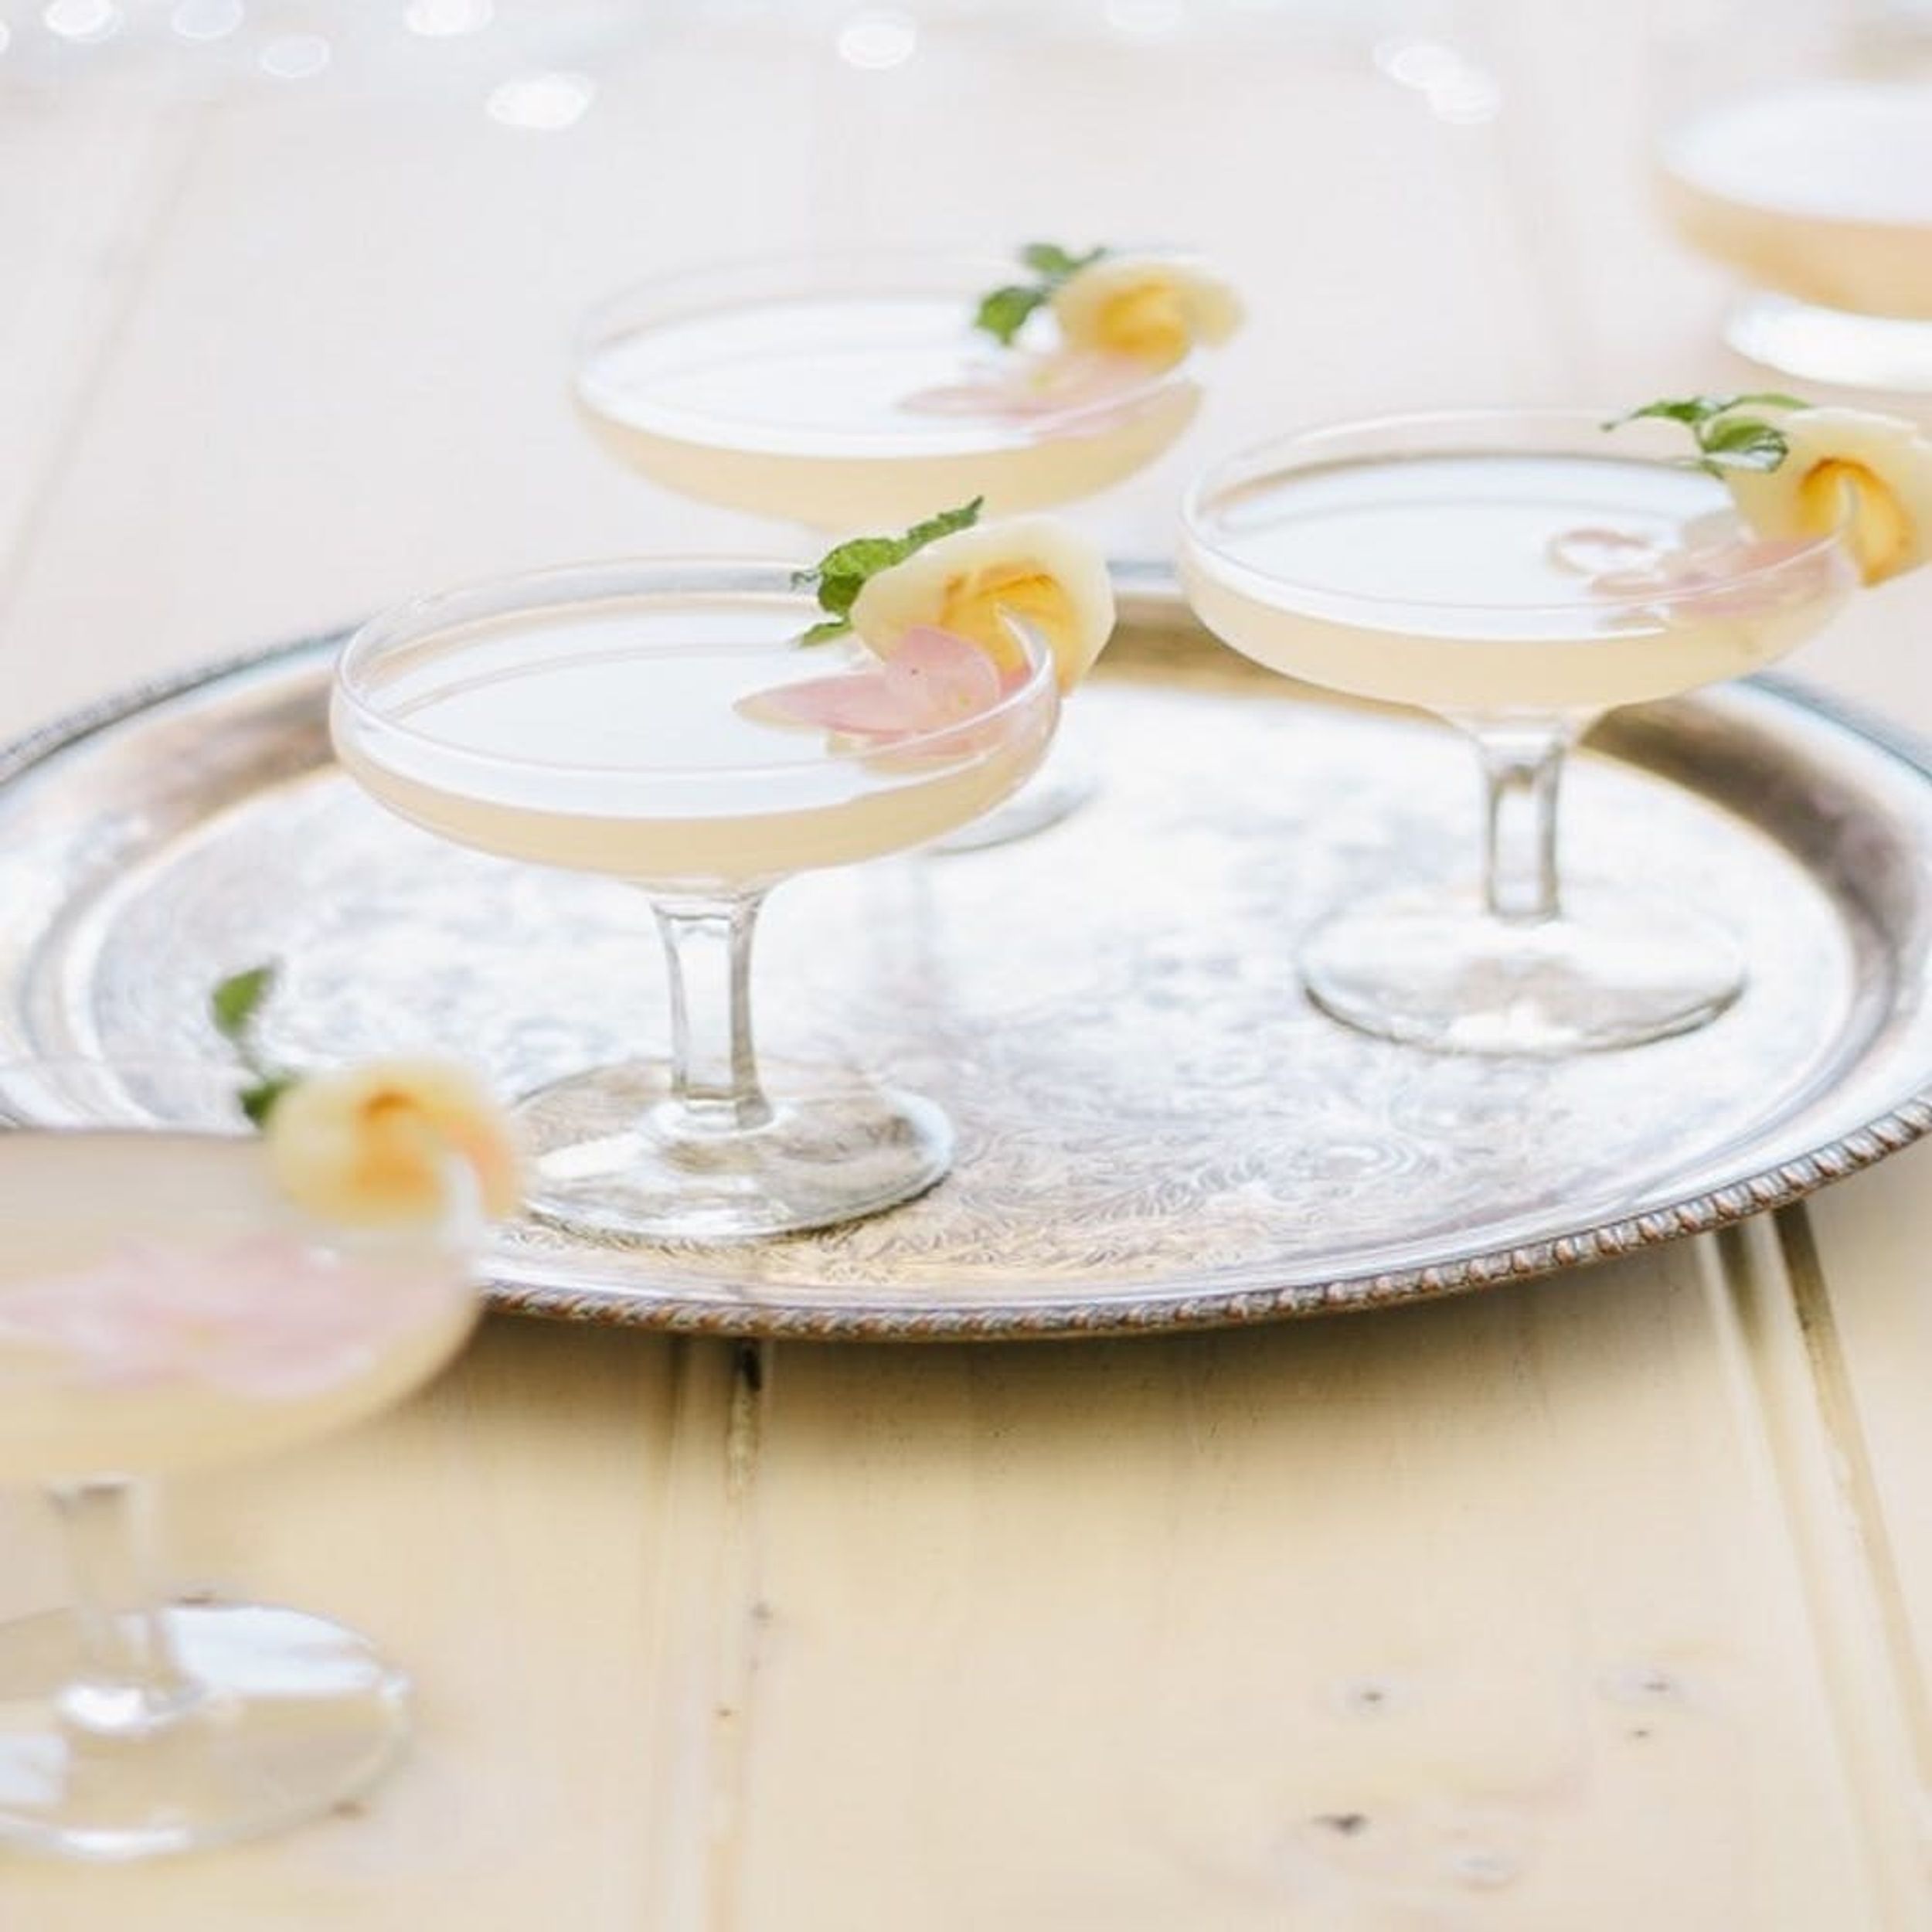 10 Tasty Lychee Cocktail Recipes That’ll Make You Think You’re in the Tropics